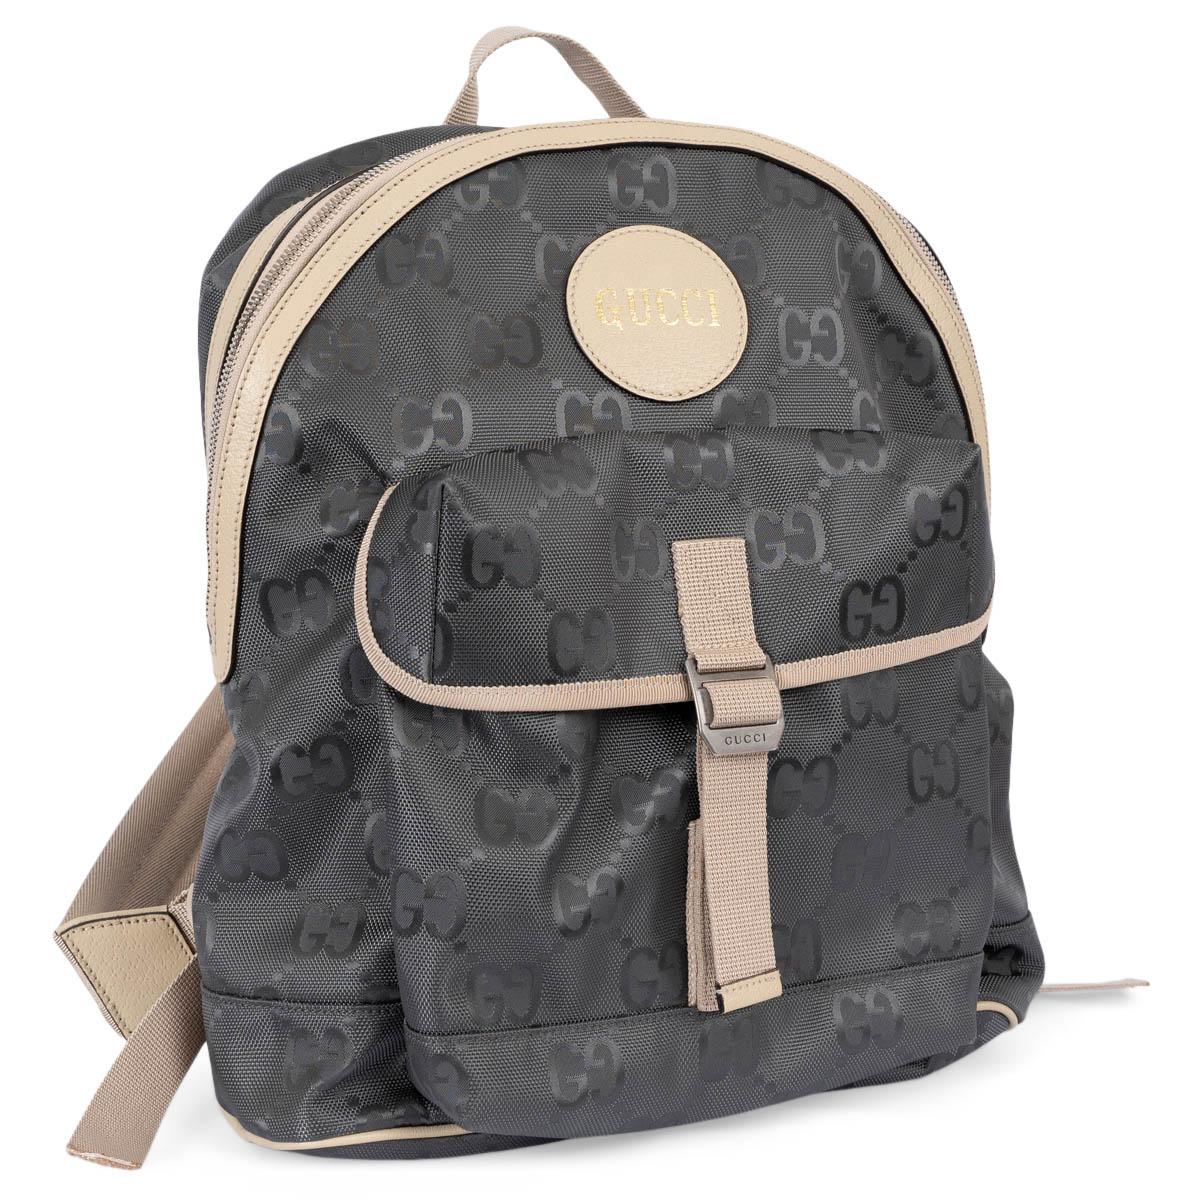 100% authentic Gucci Off the Grid backpack in grey ECONYL® canvas with pale beige leather and nylon trim. The design features the classic monogram pattern, silver-tone hardware, logo patch to the front with gold-tone lettering, single top handle,